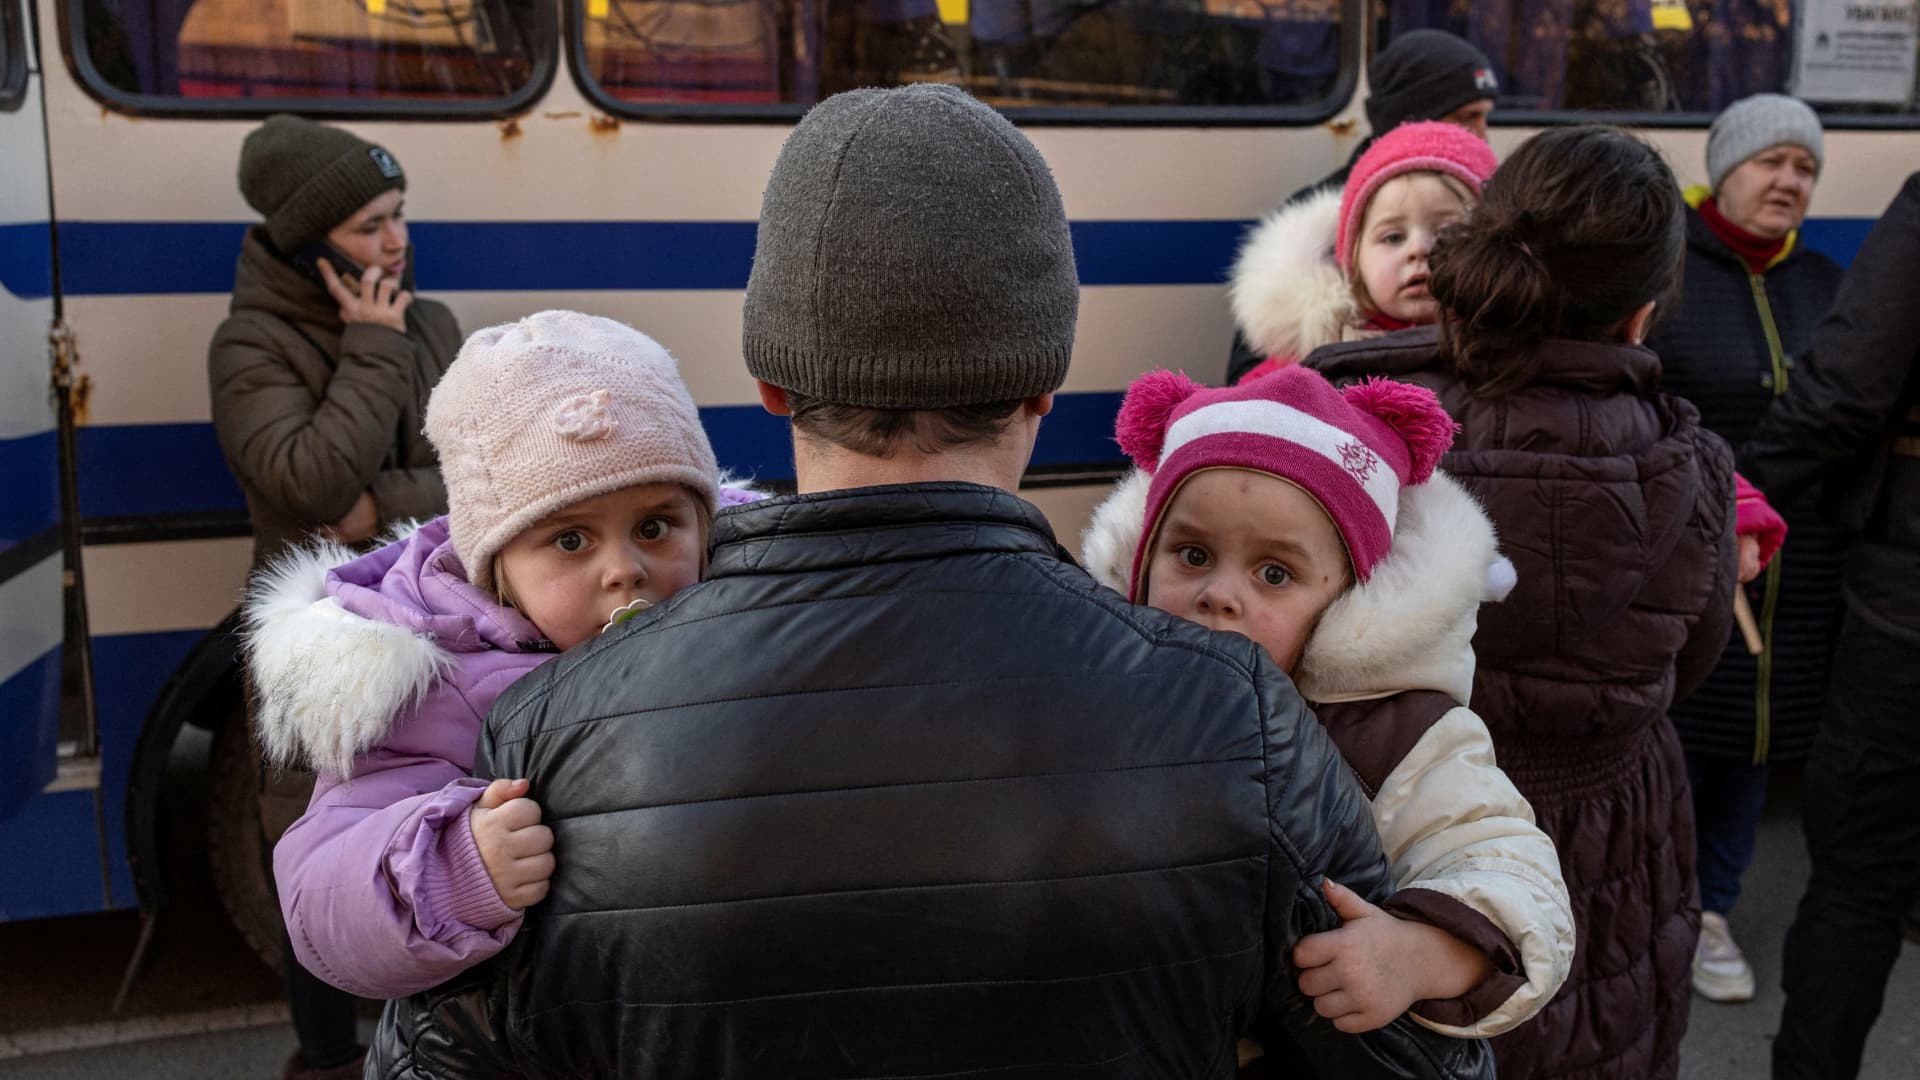 Evacuees from the villages occupied by Russian soldiers arrive in the town of Brovary, amid Russia's invasion of Ukraine, near Kyiv, Ukraine, March 20, 2022.